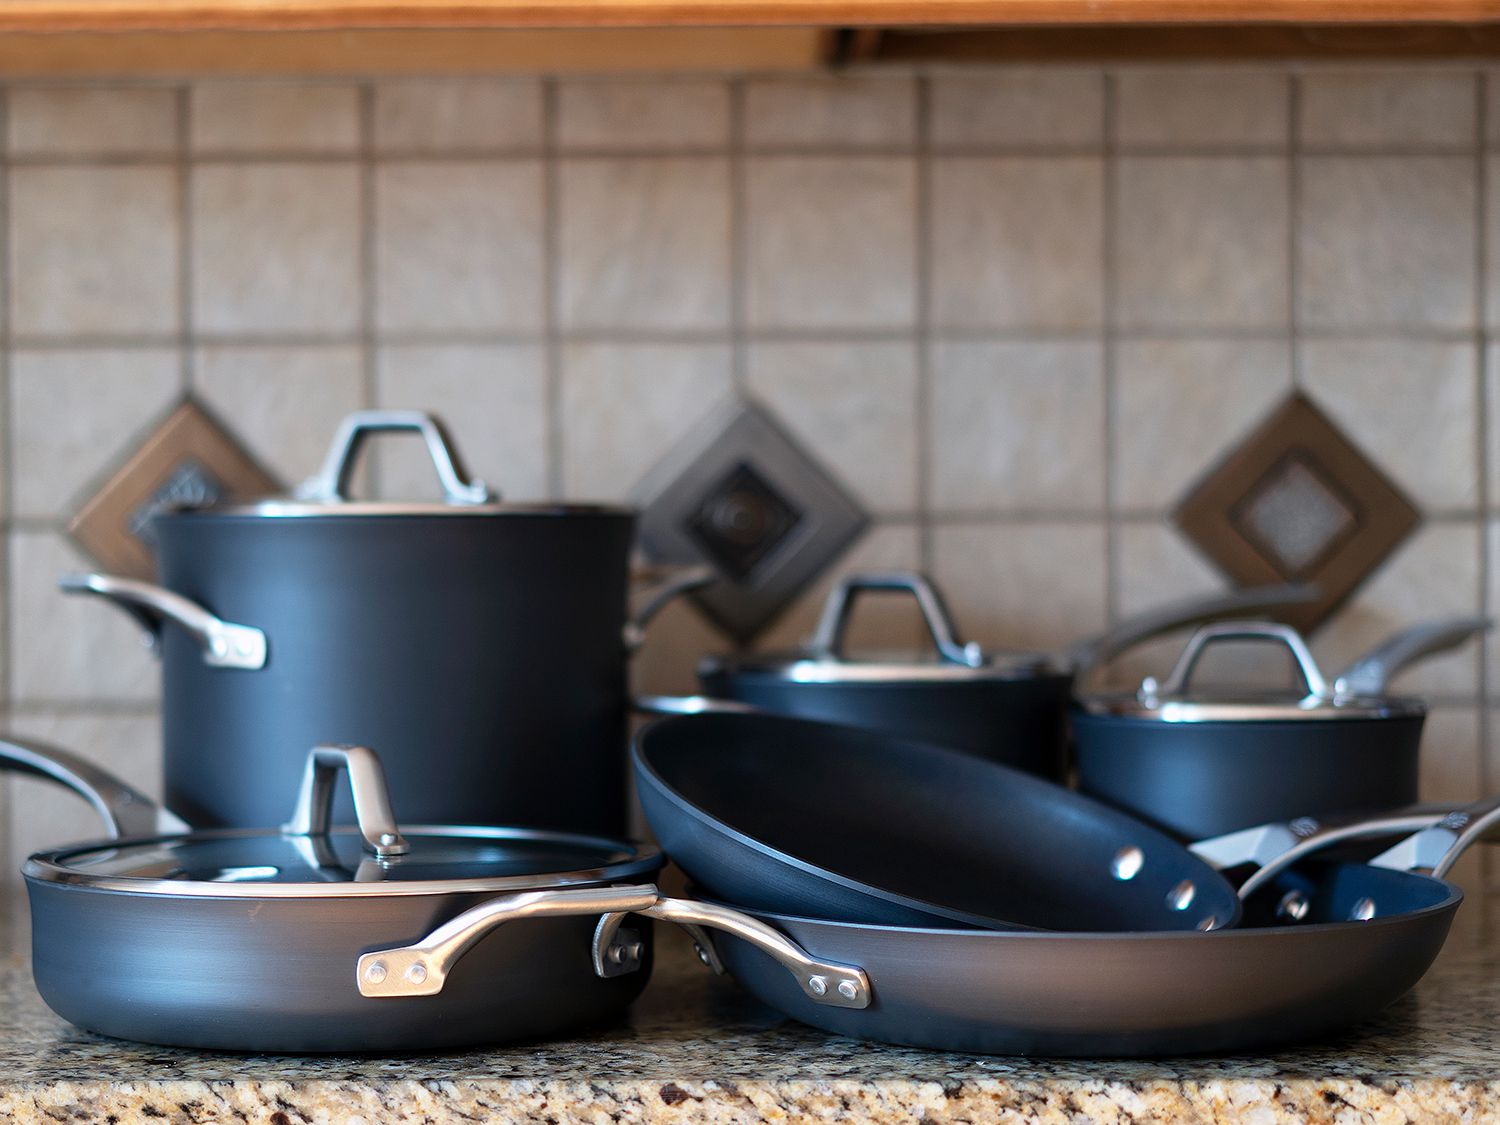 Are there different qualities of Calphalon cookware